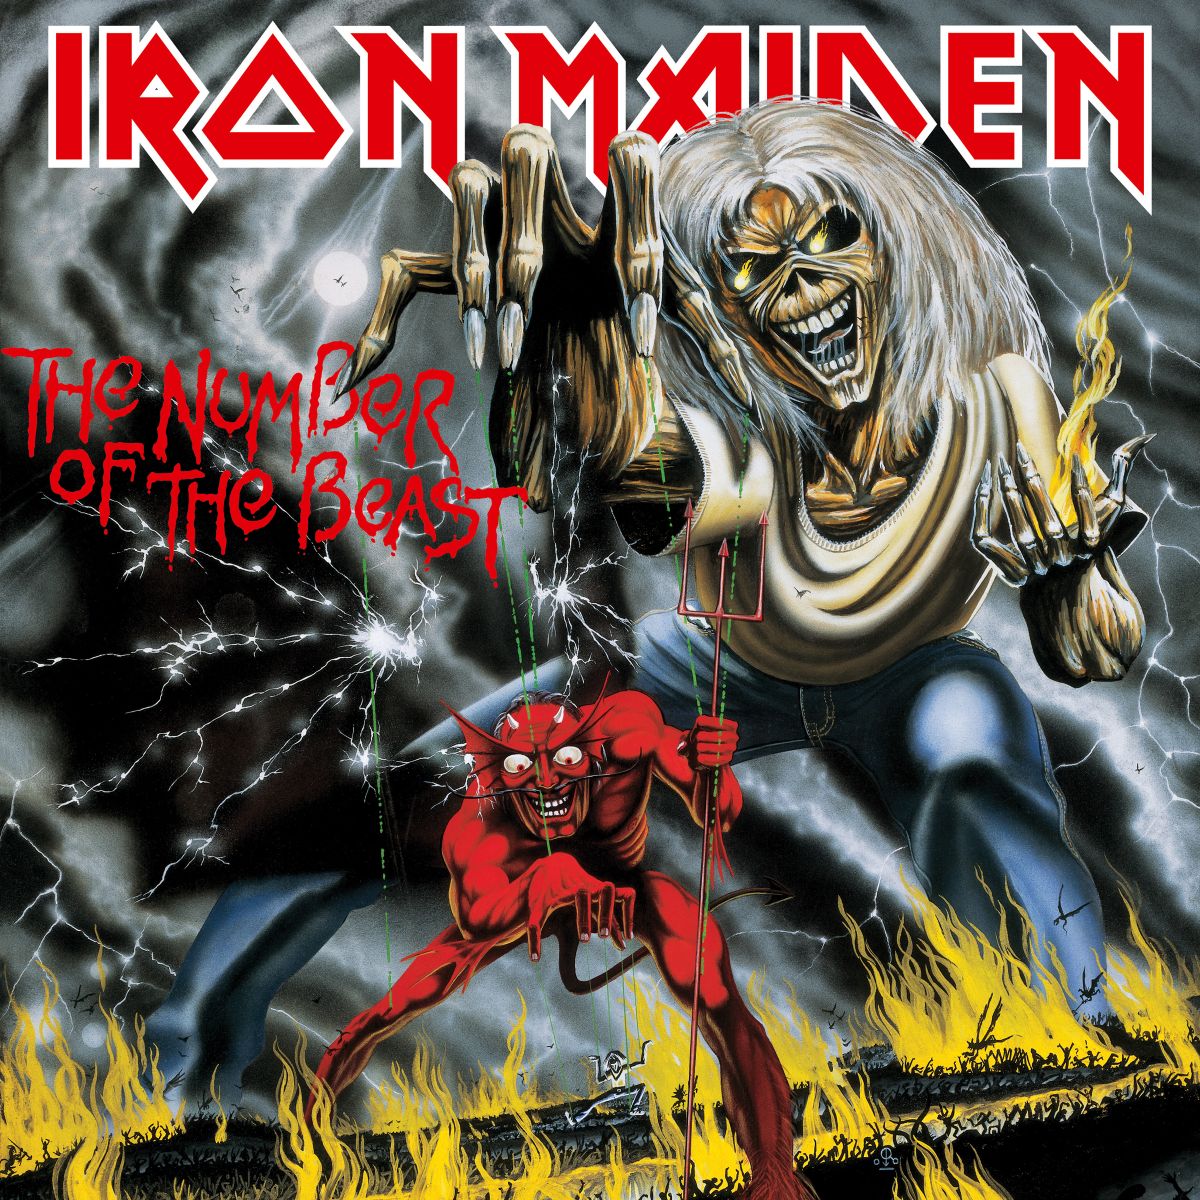 Iron Maiden celebrate 40th Anniversary of 'The Number Of The Beast'